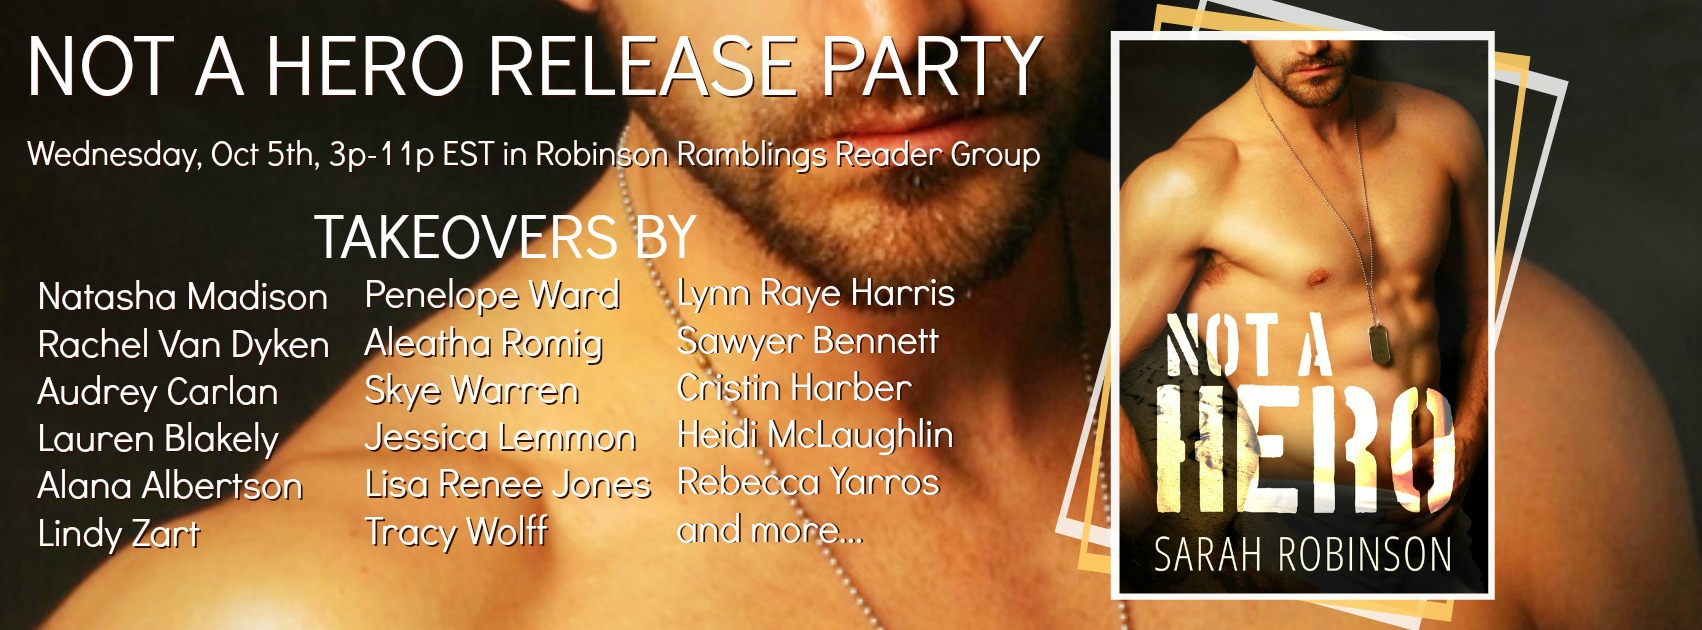 not-a-hero-release-party-banner-1-w-authors